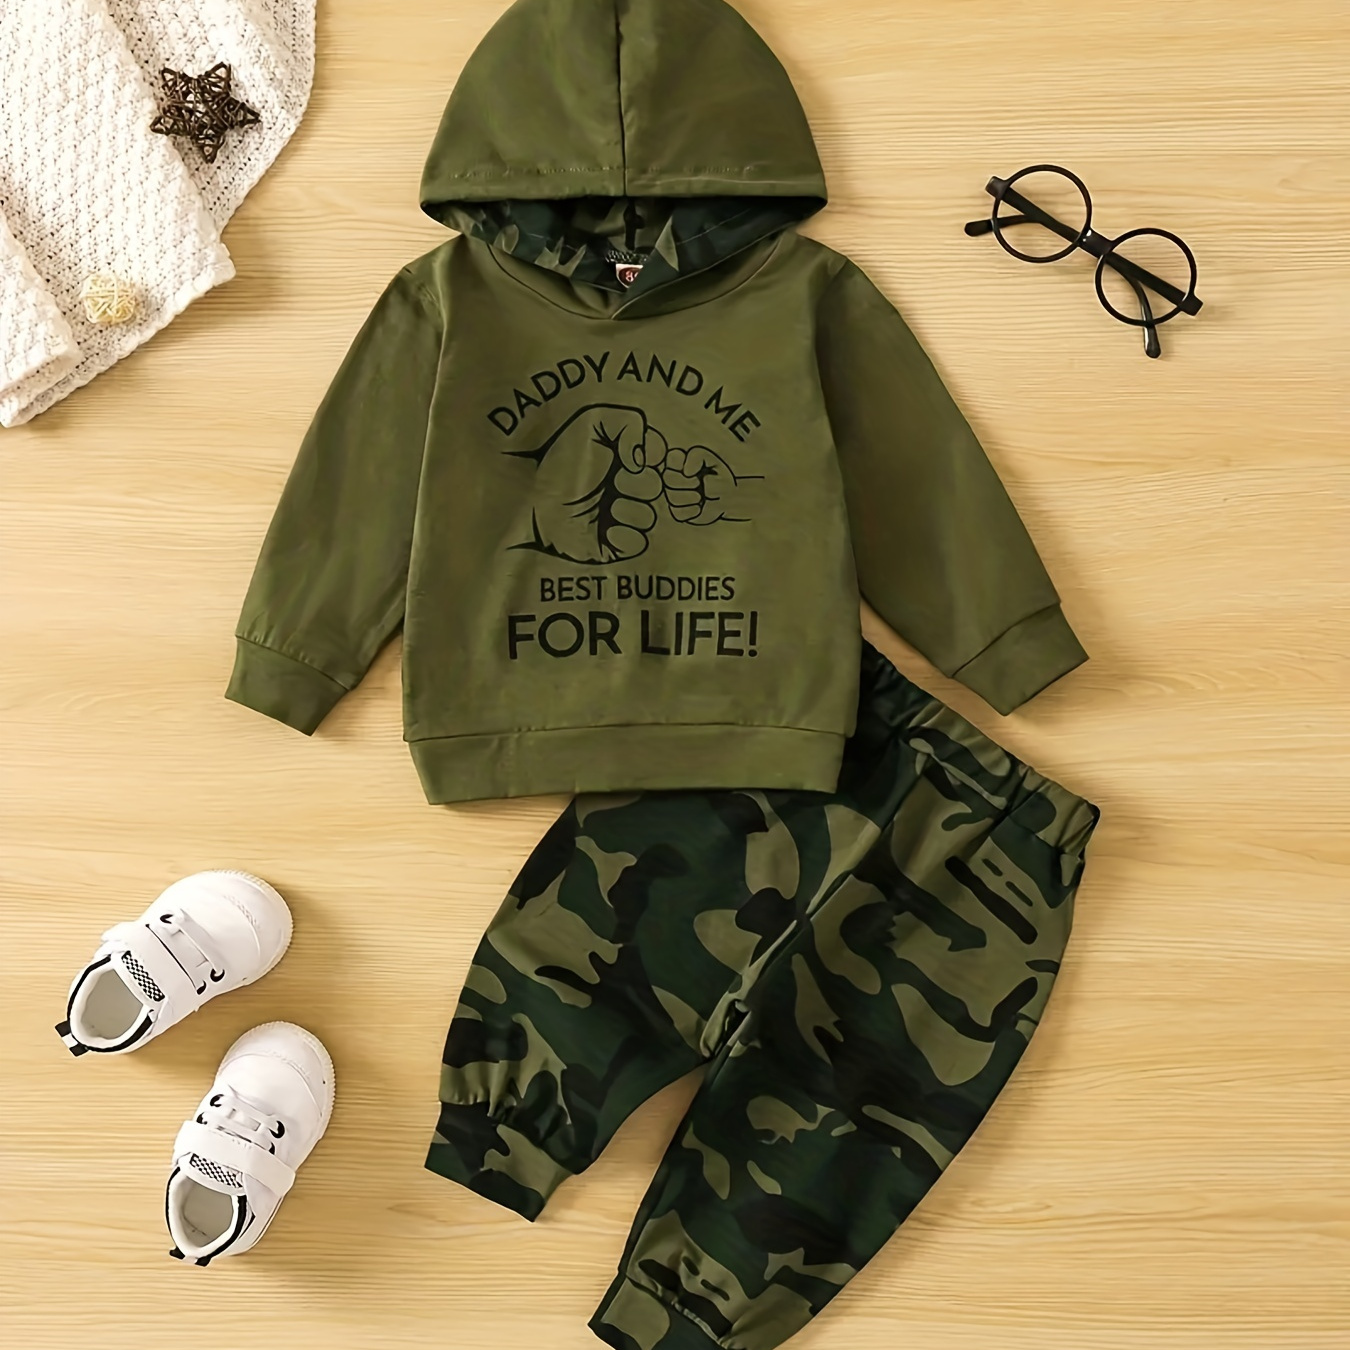 

Baby Boys Casual & Stylish Outfit - Hooded Long Sleeve Top + Camo Pants Set